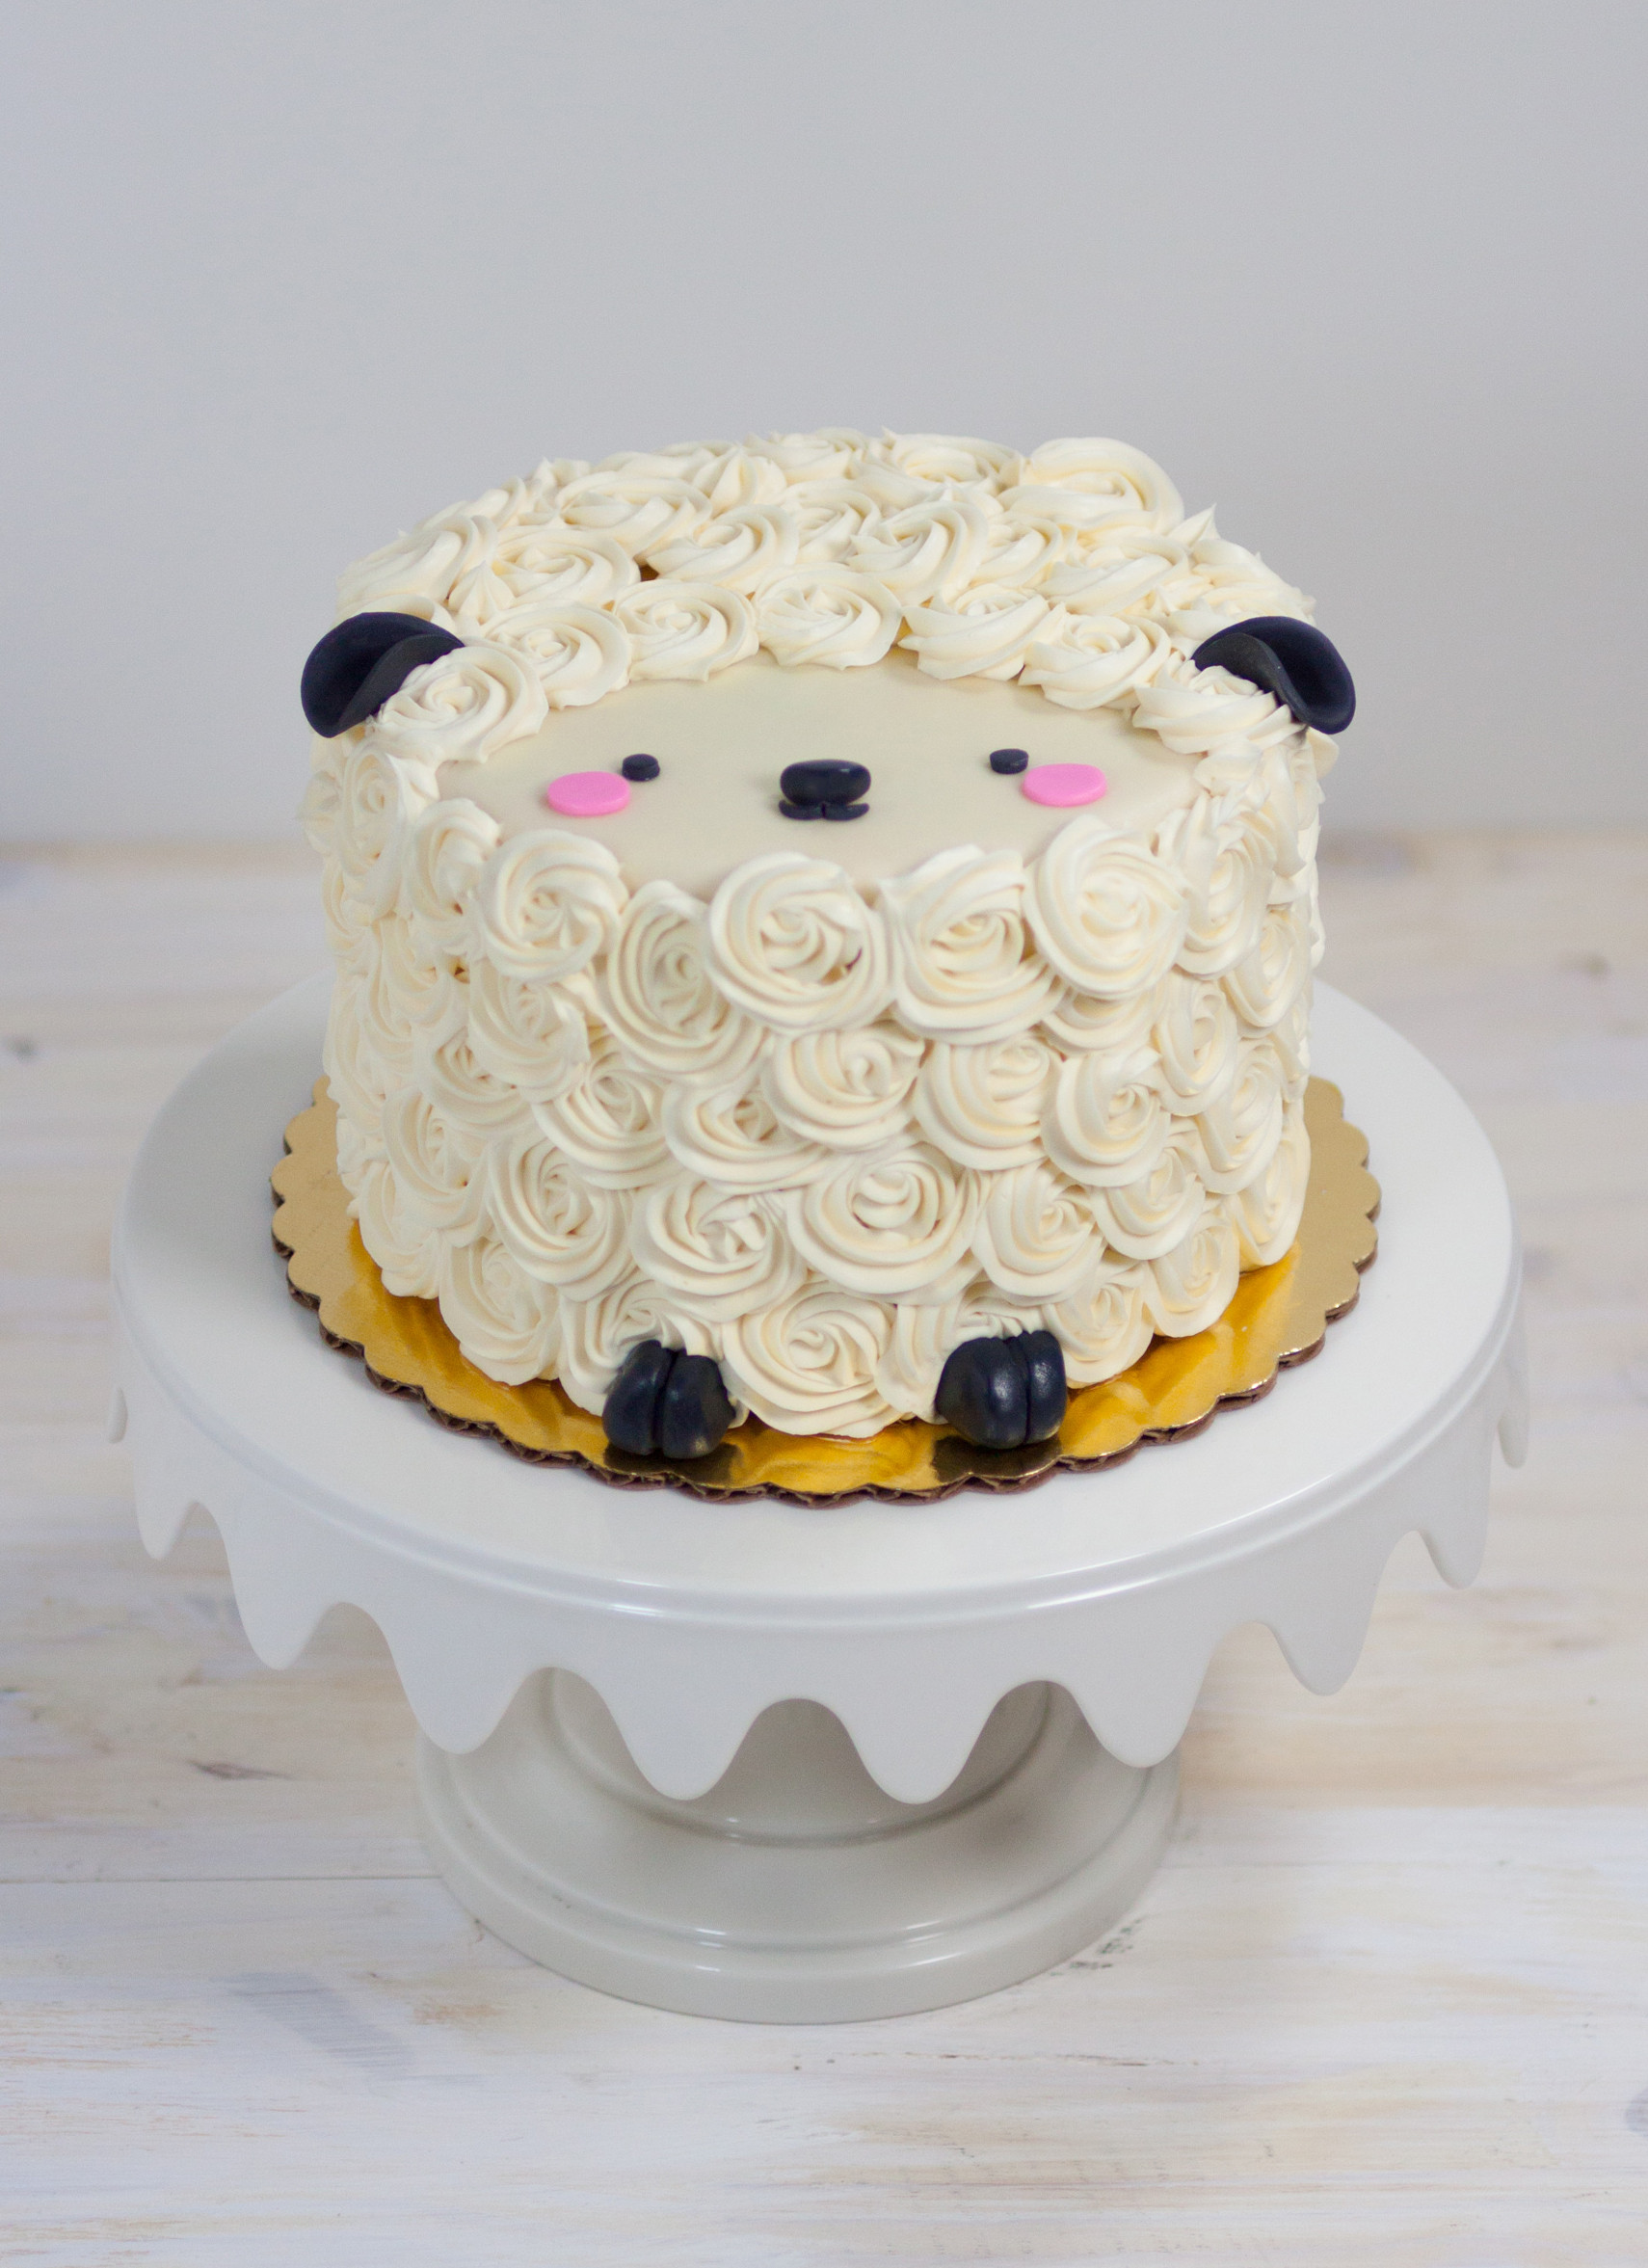 Animal Birthday Cakes
 Lois the Lamb Mini cake by Whipped Bakeshop